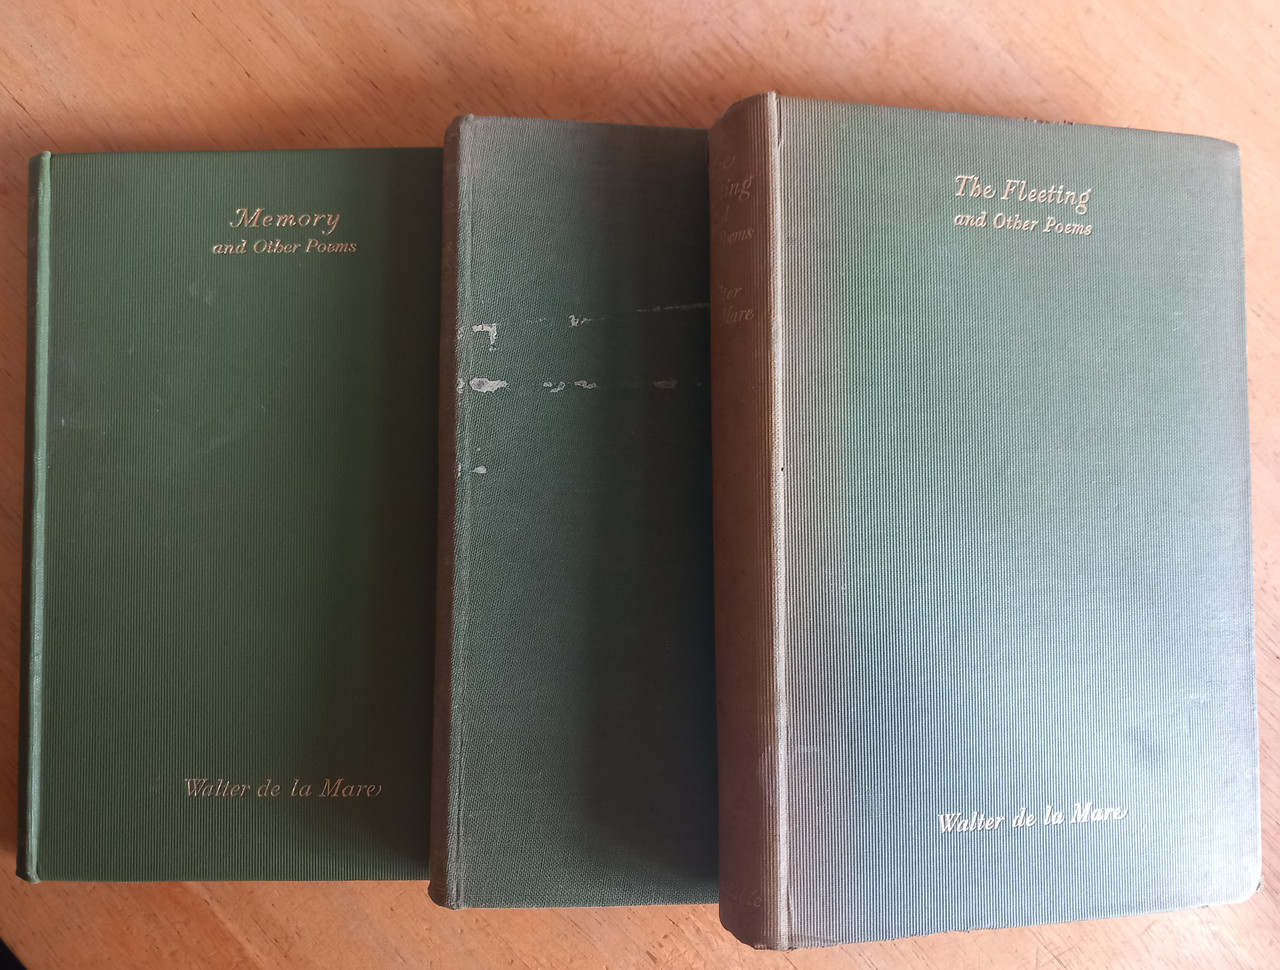 Walter de la Mare - Three Vintage POETRY  - The Fleeting & Other Poems ( 1933 ), Stuff and Nonsense ( 1927) , Memory & Other Poems  ( 1938 )